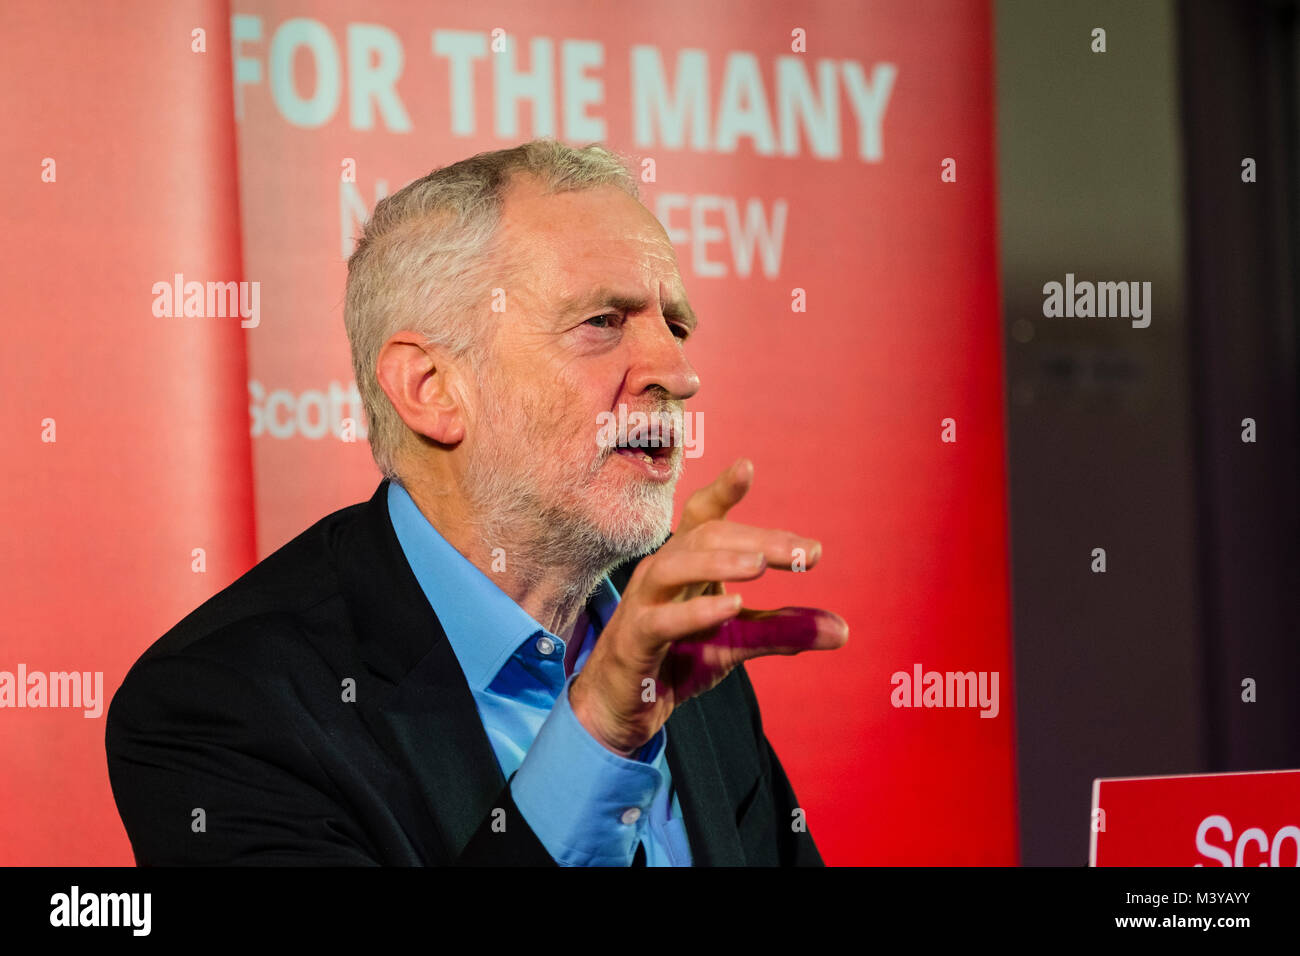 Penicuik, Scotland, United Kingdom, 12 February, 2018. Labour Leader Jeremy Corbyn gives speech at the Shottstown Miners Welfare Hall, Penicuik, Midlothian at the start of a tour of Scotland this week. Credit: Iain Masterton/Alamy Live News Stock Photo